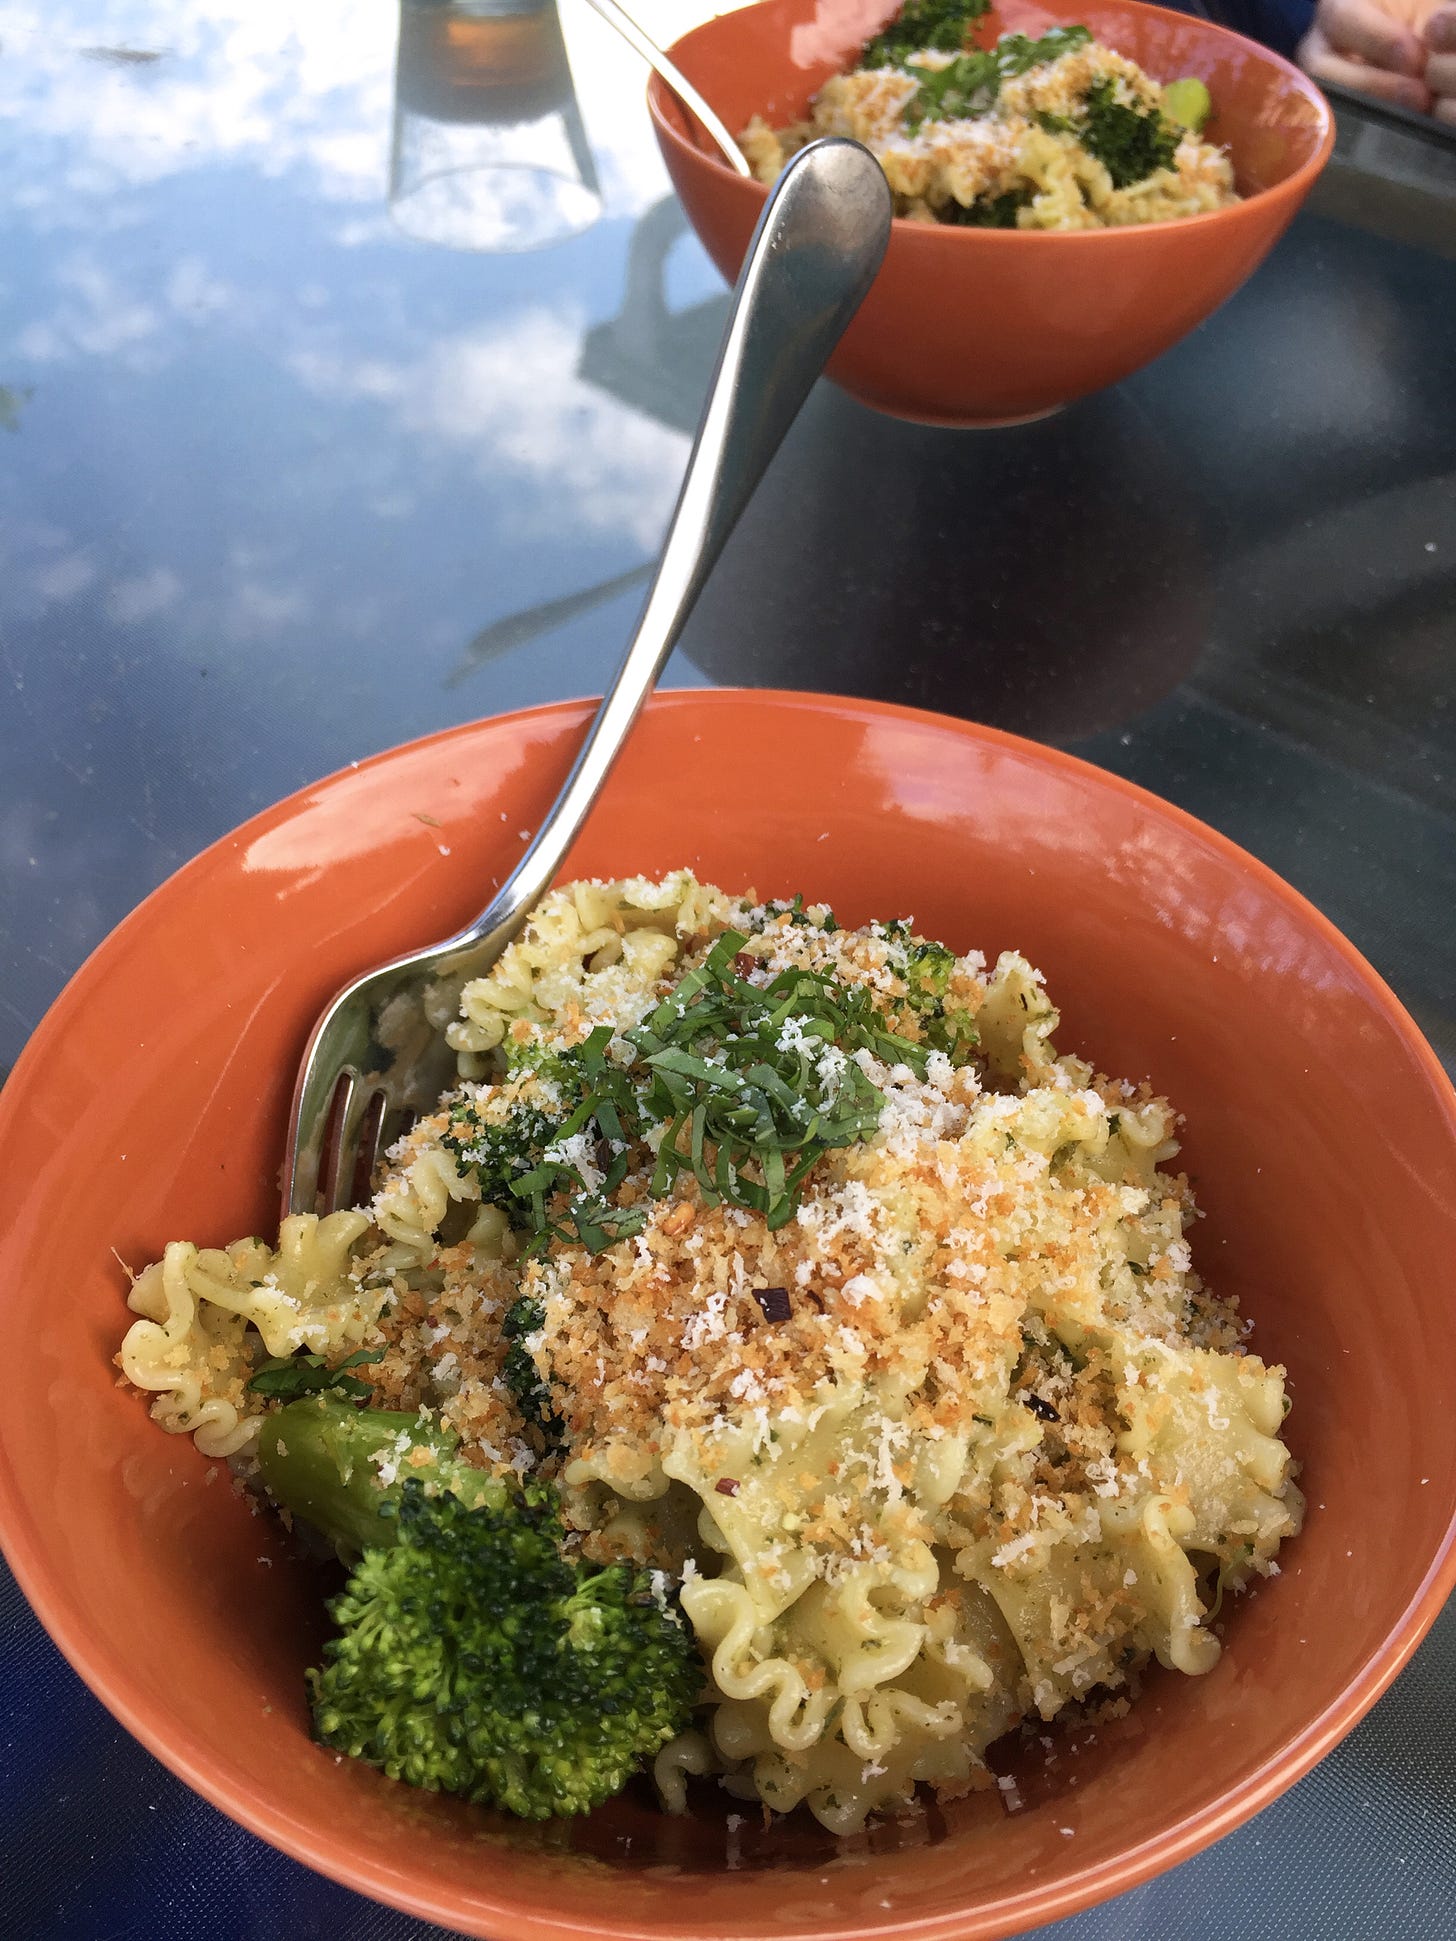 two orange bowls filled with pesto-coated mafalda noodles, with pieces of charred broccoli. On top are toasted panko crumbs with shreds of parmesan and basil.